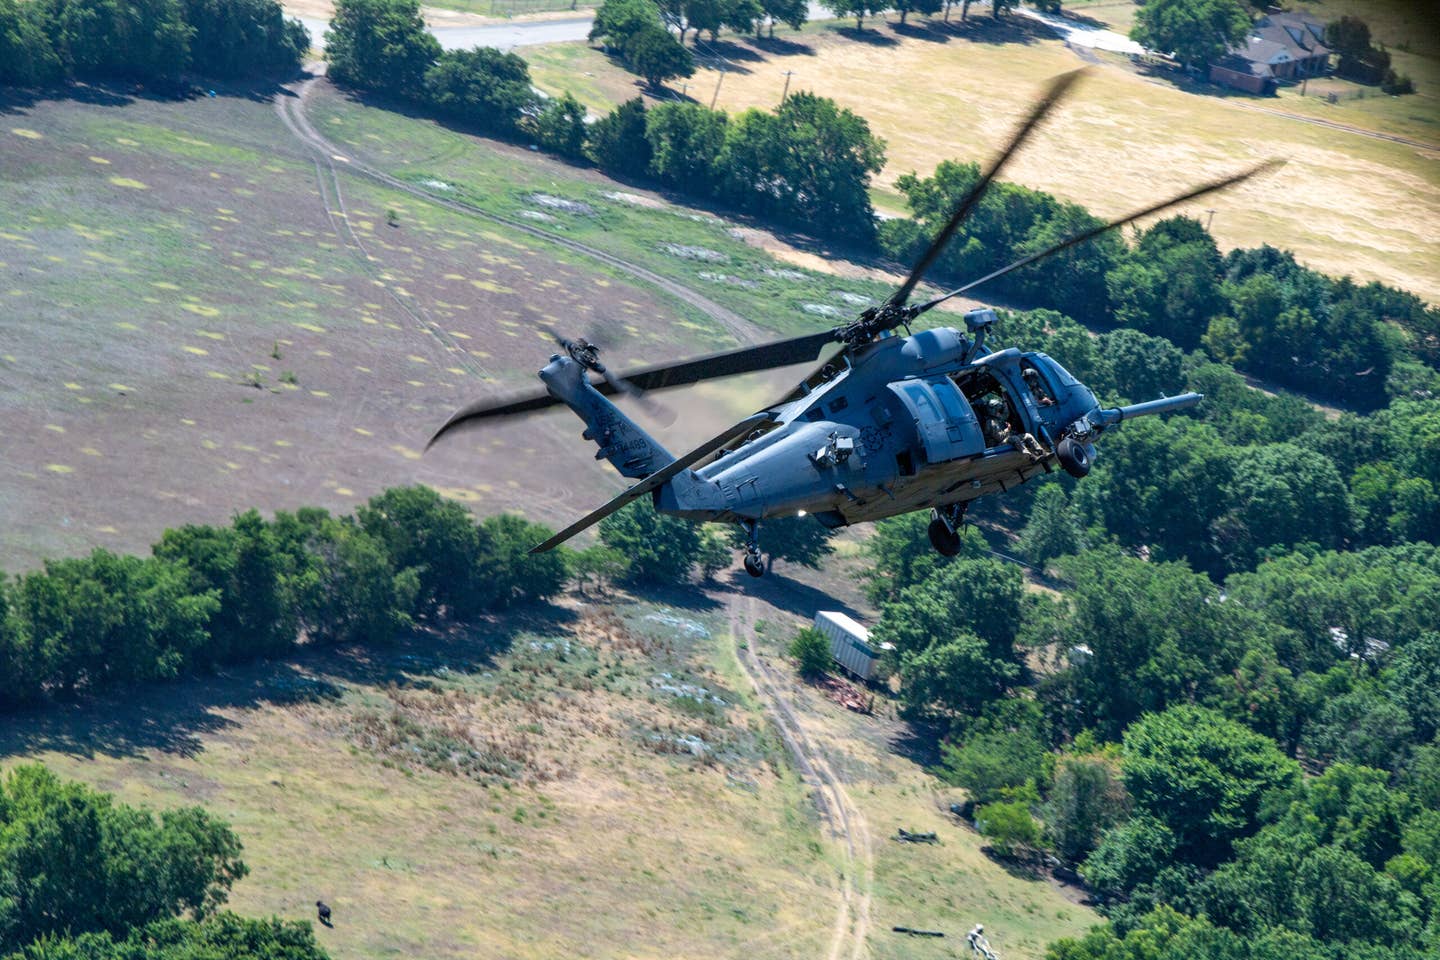 A U.S. Air Force HH-60W Jolly Green II, from the 41st Rescue Squadron, conducts air combat maneuvers in the skies of Lancaster, Texas, June 29, 2022. This week-long training was the first time the 41st RQS executed training air combat maneuvers with the HH-60W Jolly Green II helicopter against an Mi-24 Hind. (U.S. Air Force photo by Airman 1st Class Courtney Sebastianelli)